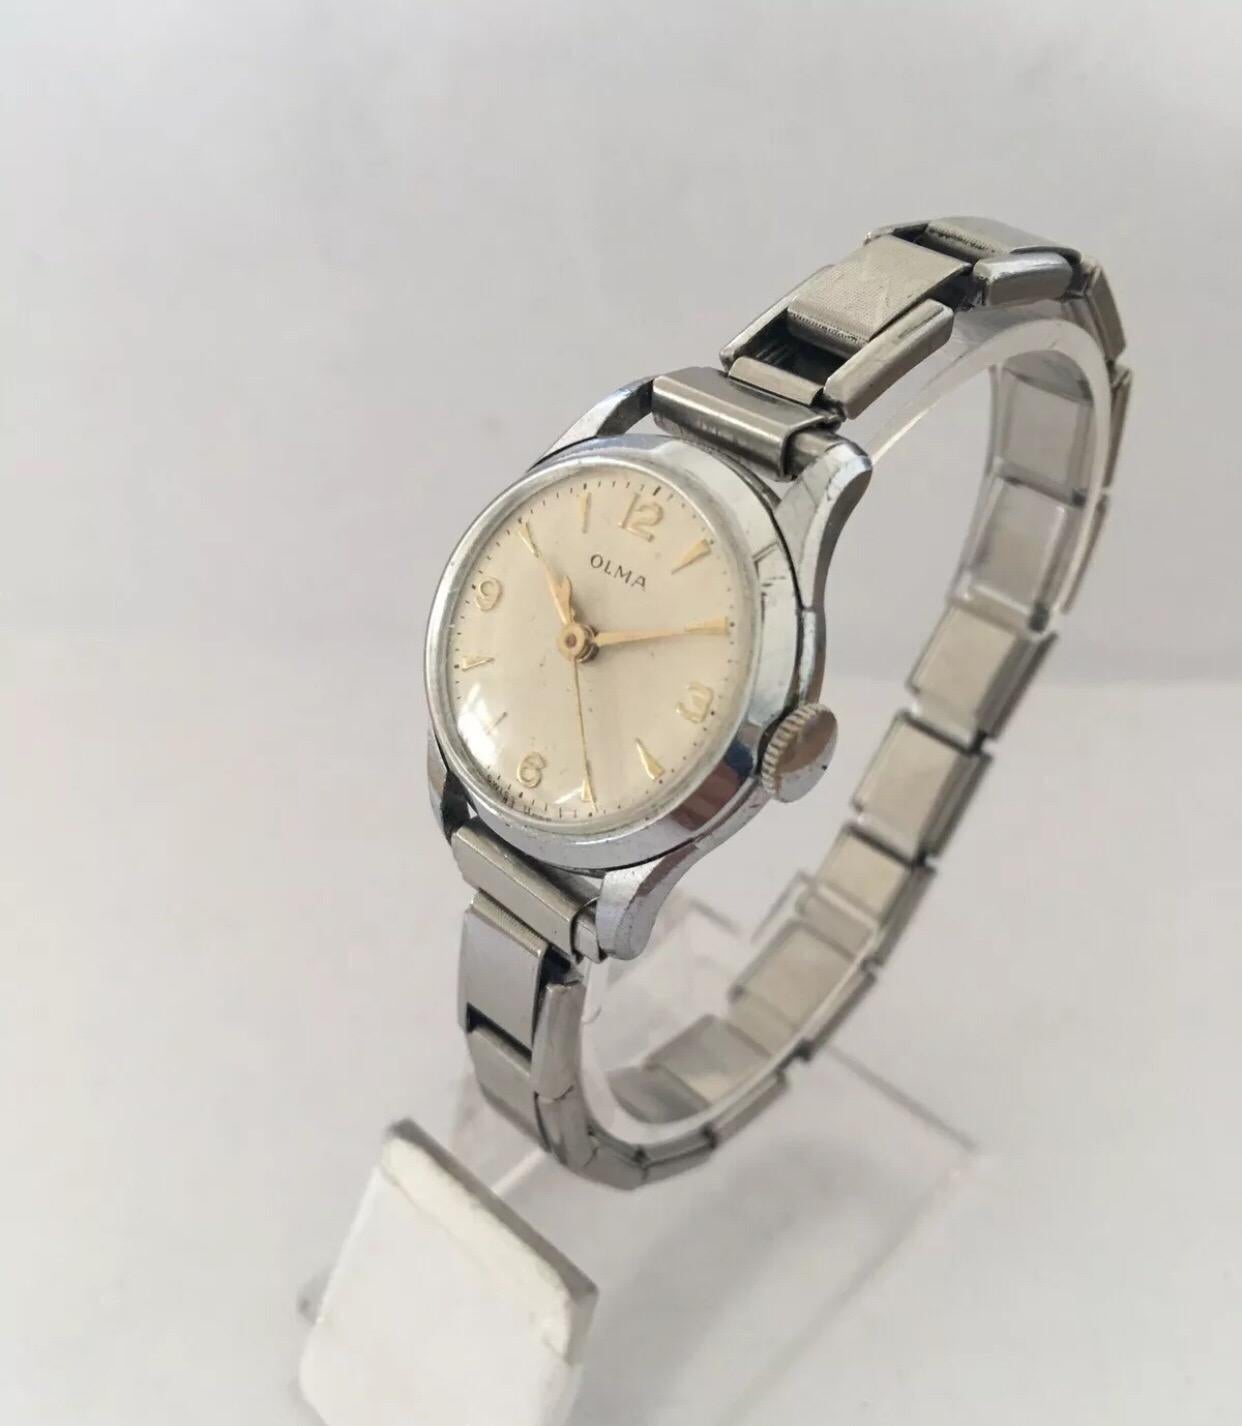 Vintage Hand-Winding Olma Swiss Made Ladies Wristwatch with Flexible Strap 5